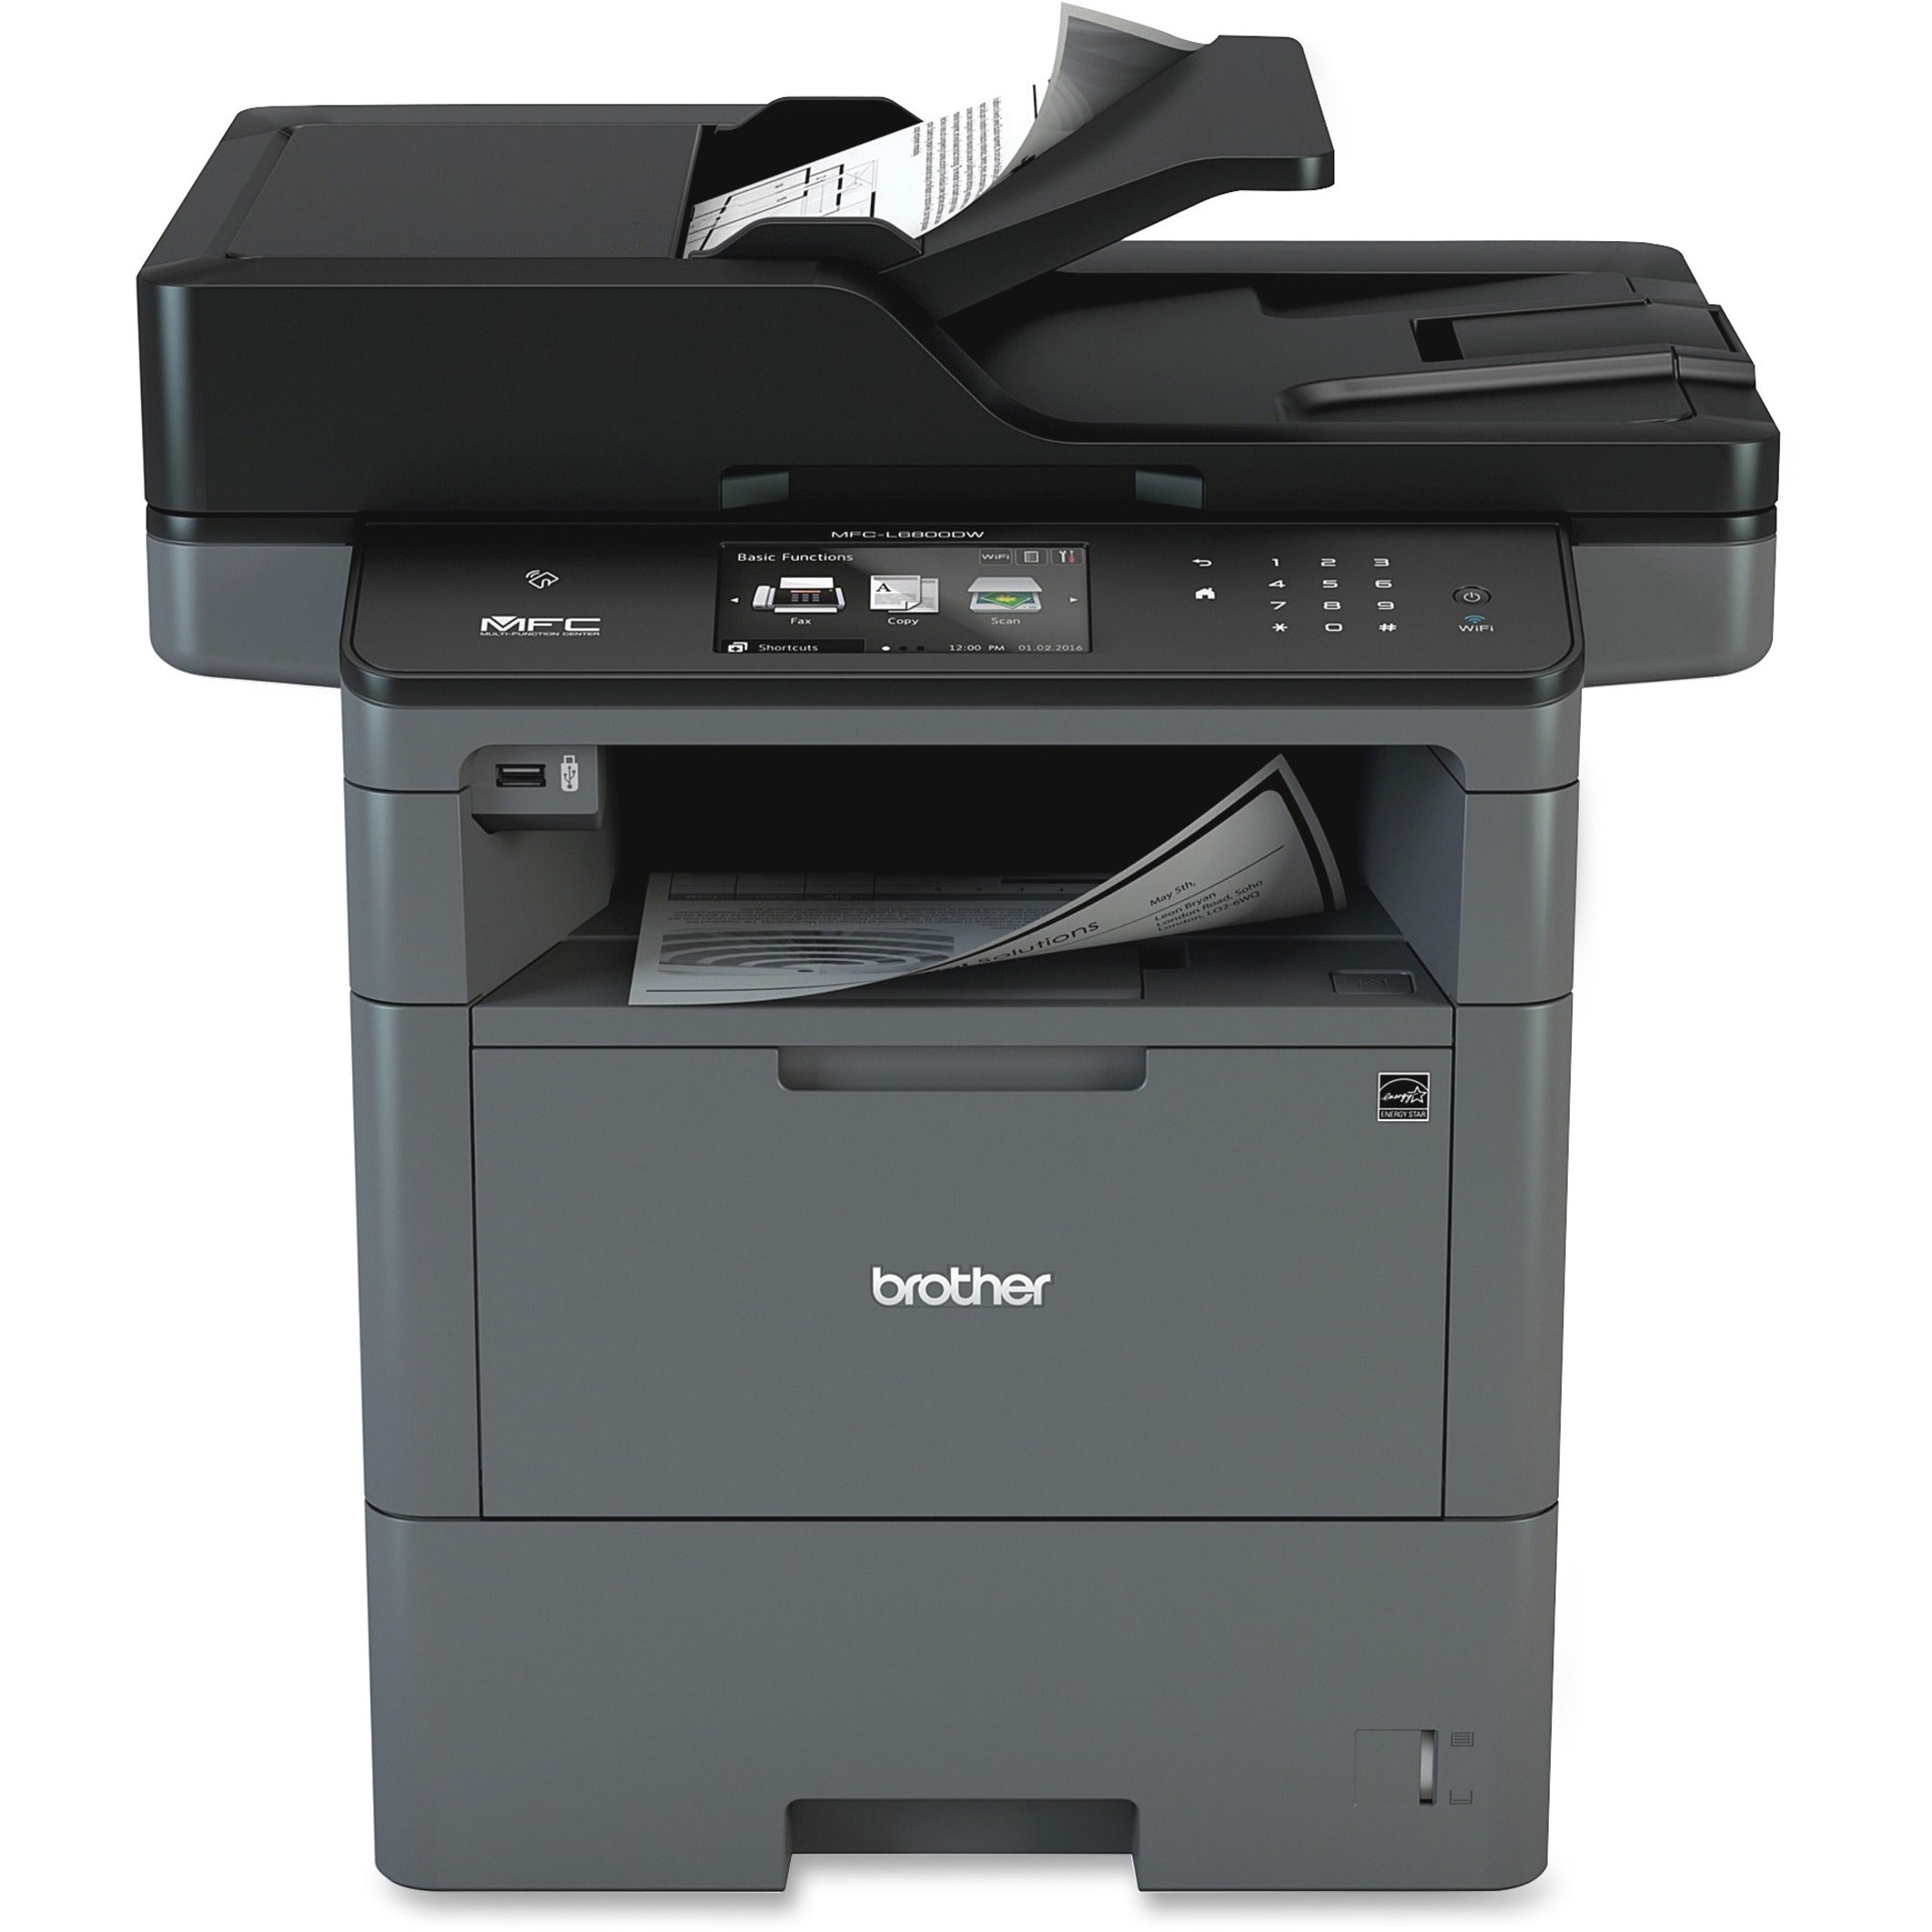 Brother MFCL6800DW All-In-1 Printer, 48ppm, 570-Sheet Capacity, Black/Gray